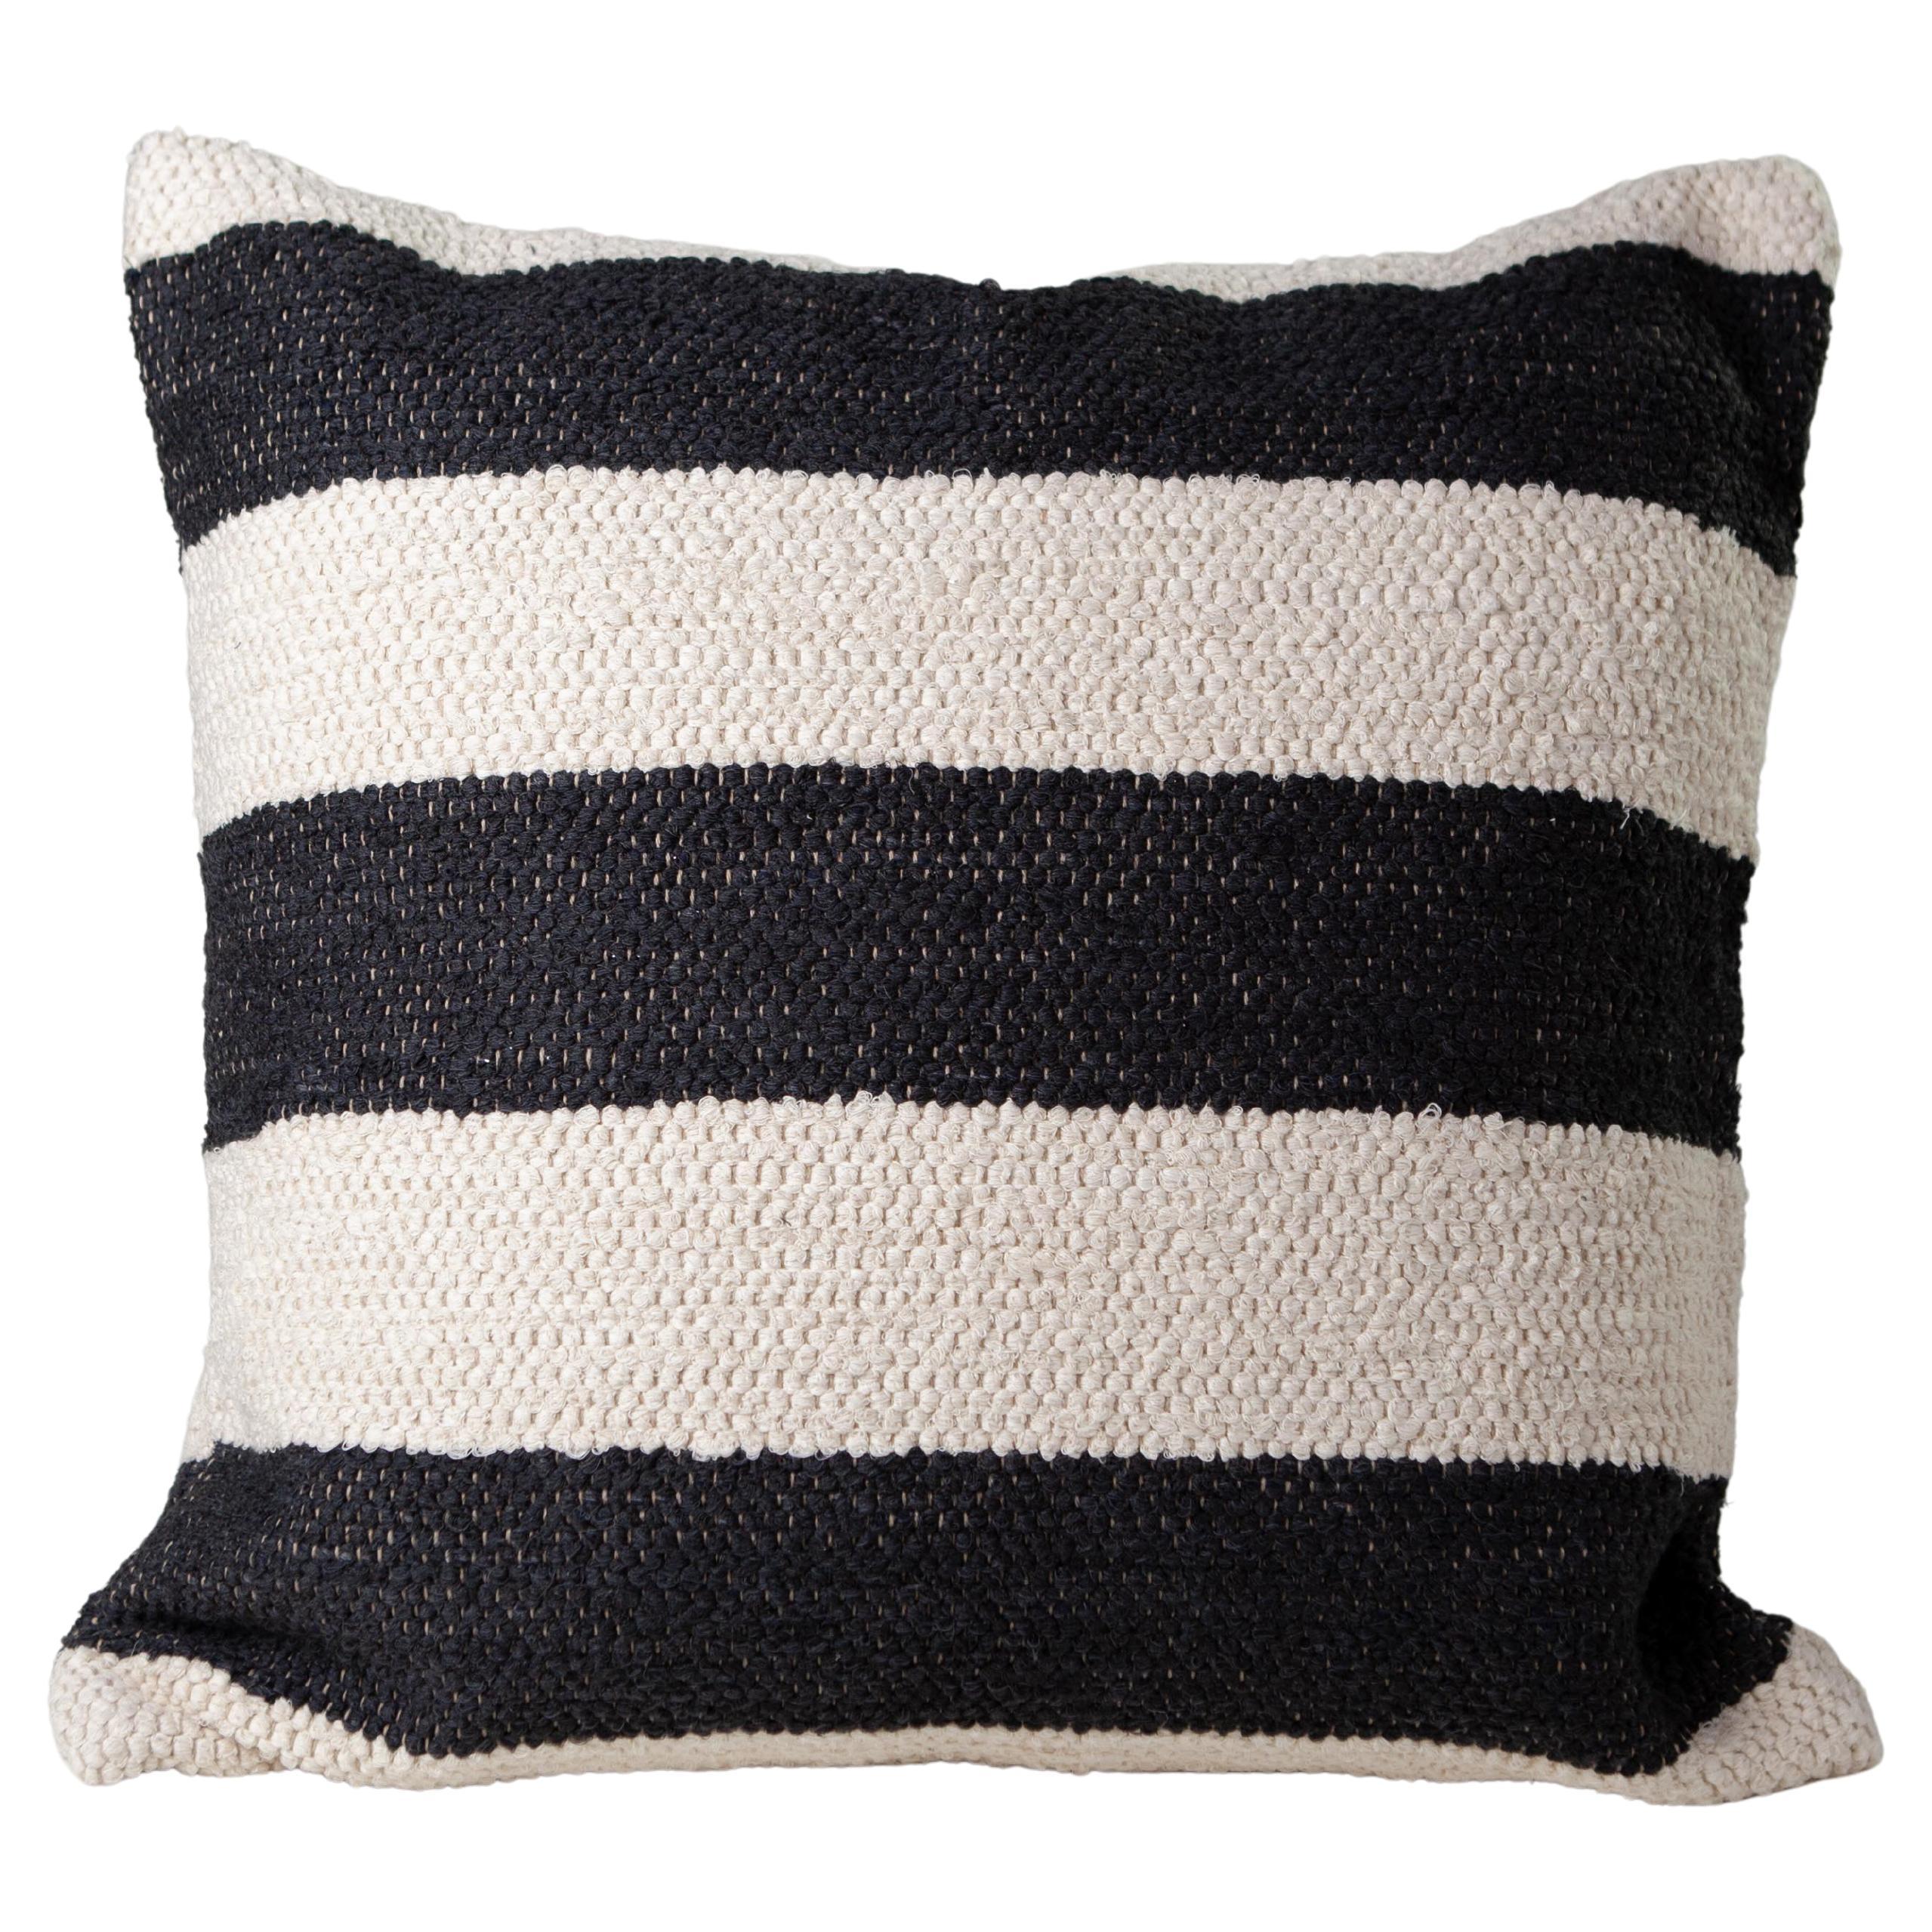 Casa Cubista Textured Recycled Cotton Black and White Bold Stripe Throw Pillow